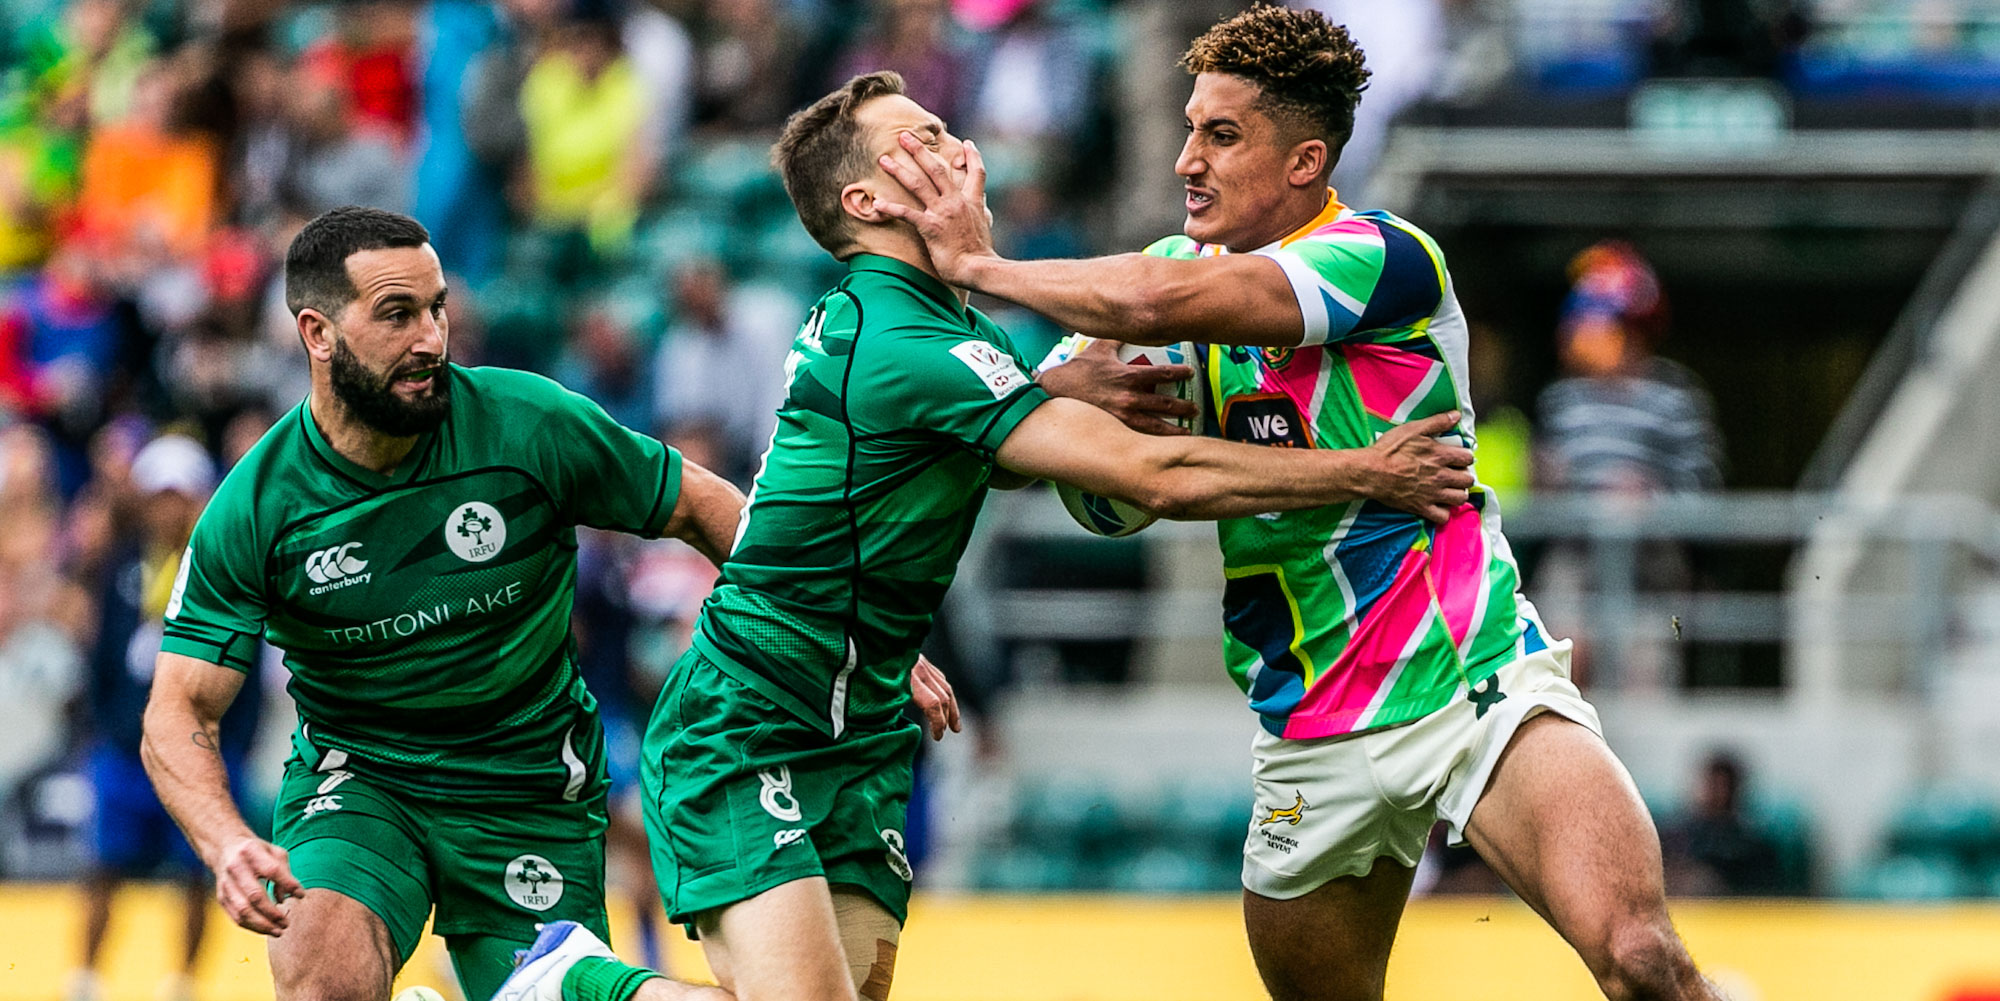 Jordan Hendrikse, who made his Blitzbok debut in London, on the attack against Ireland on Sunday.